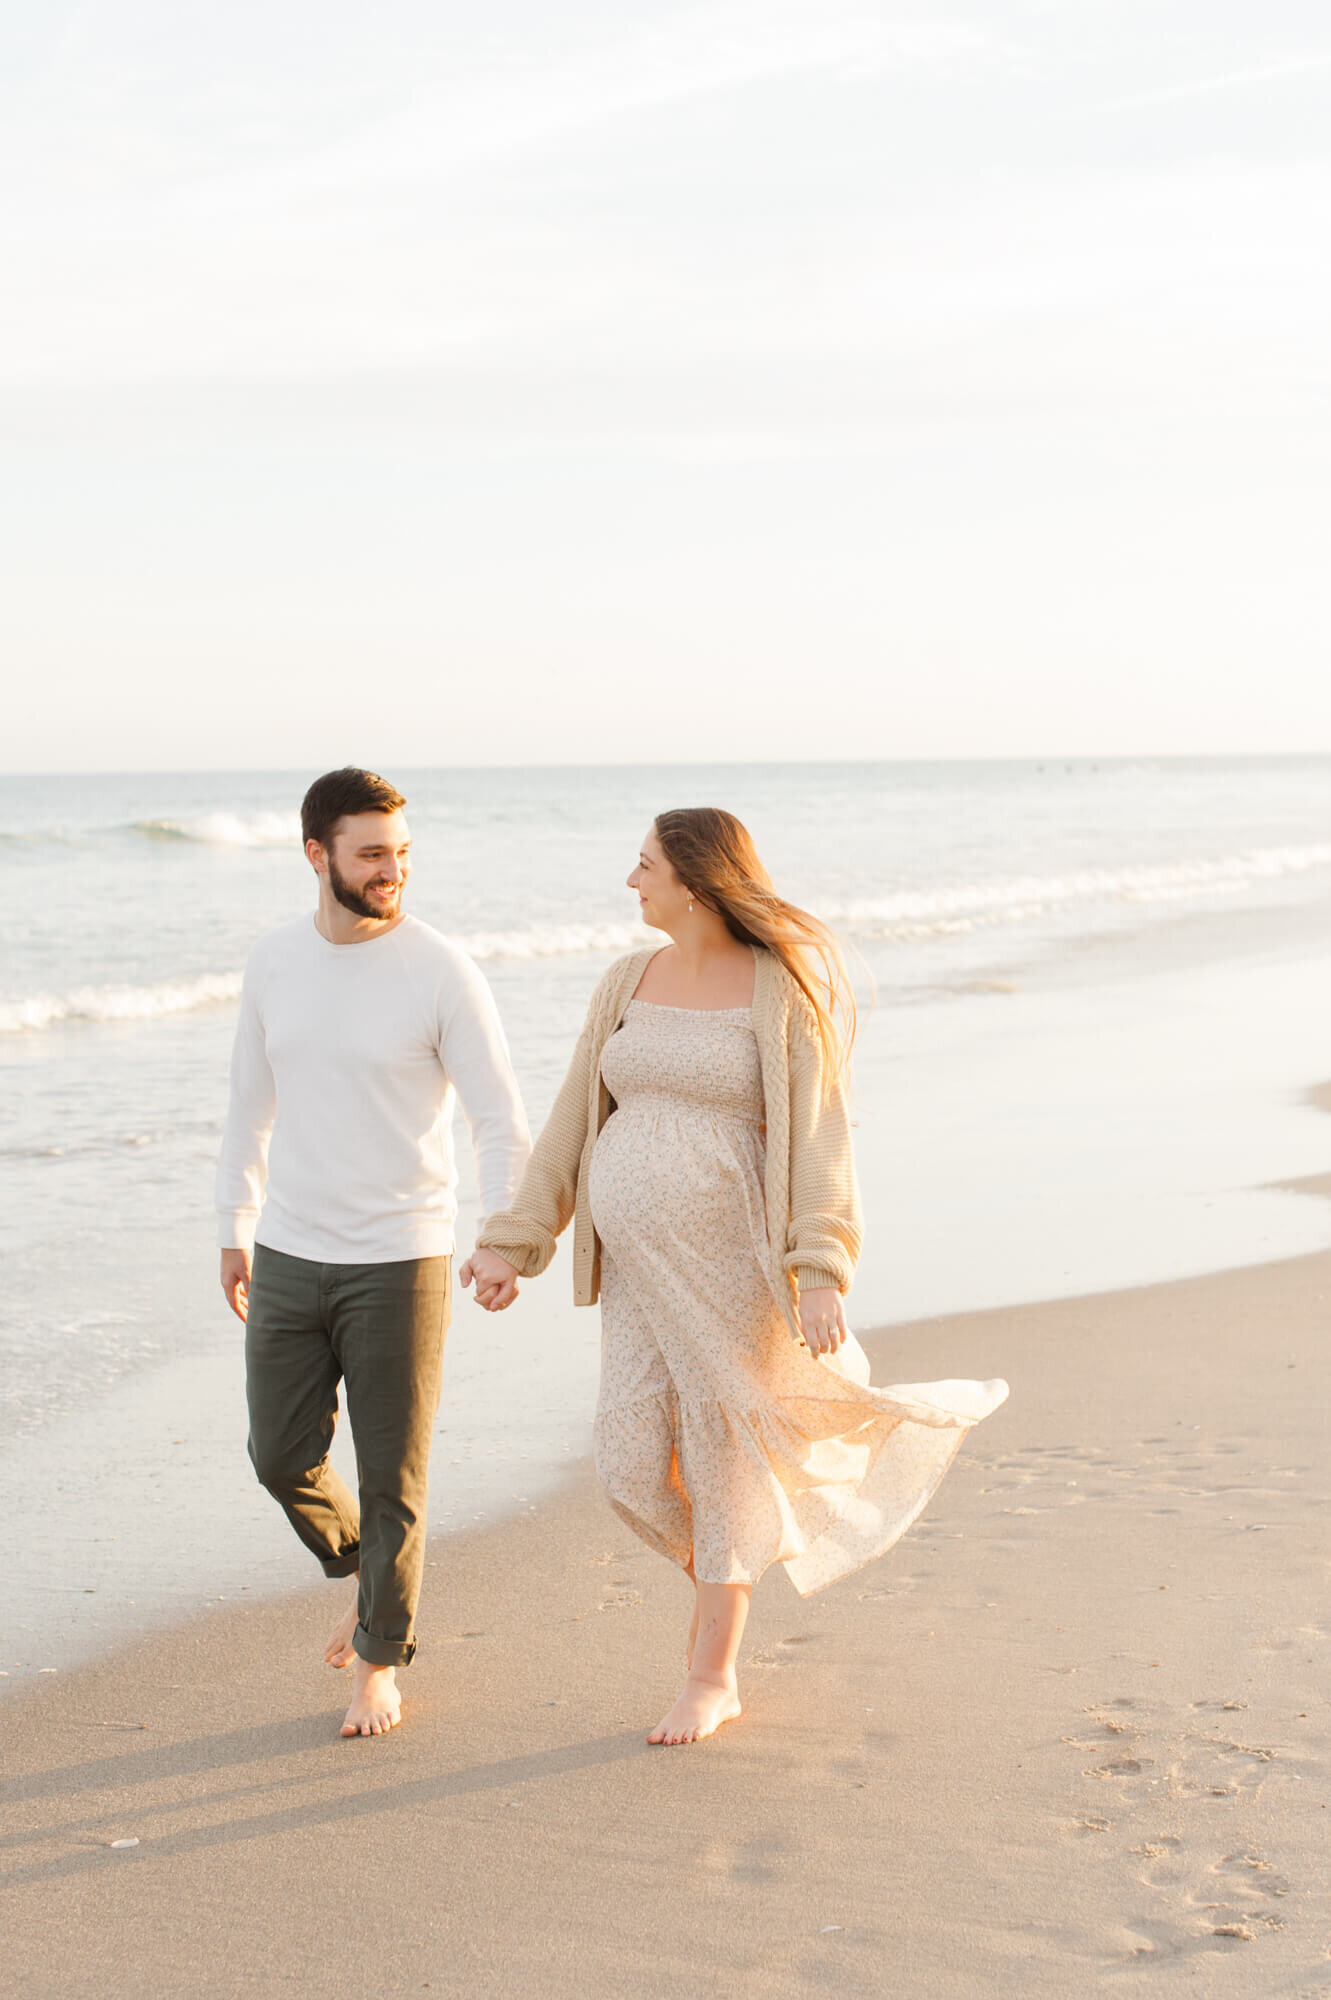 Pregnant mom walks along the beach holding hands with her husband